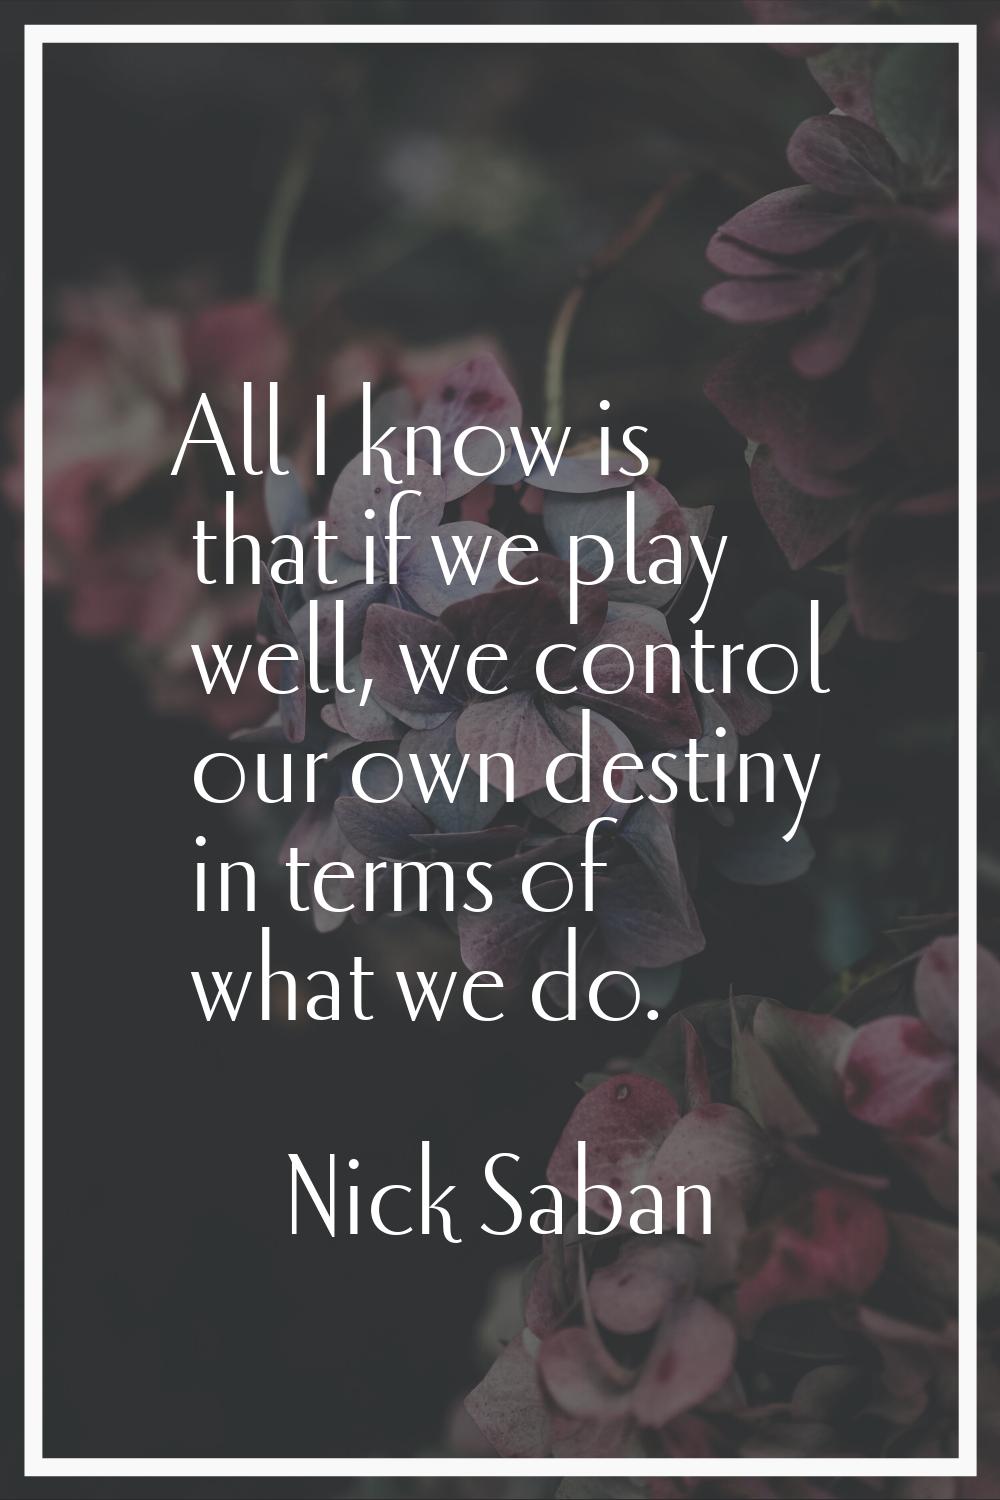 All I know is that if we play well, we control our own destiny in terms of what we do.